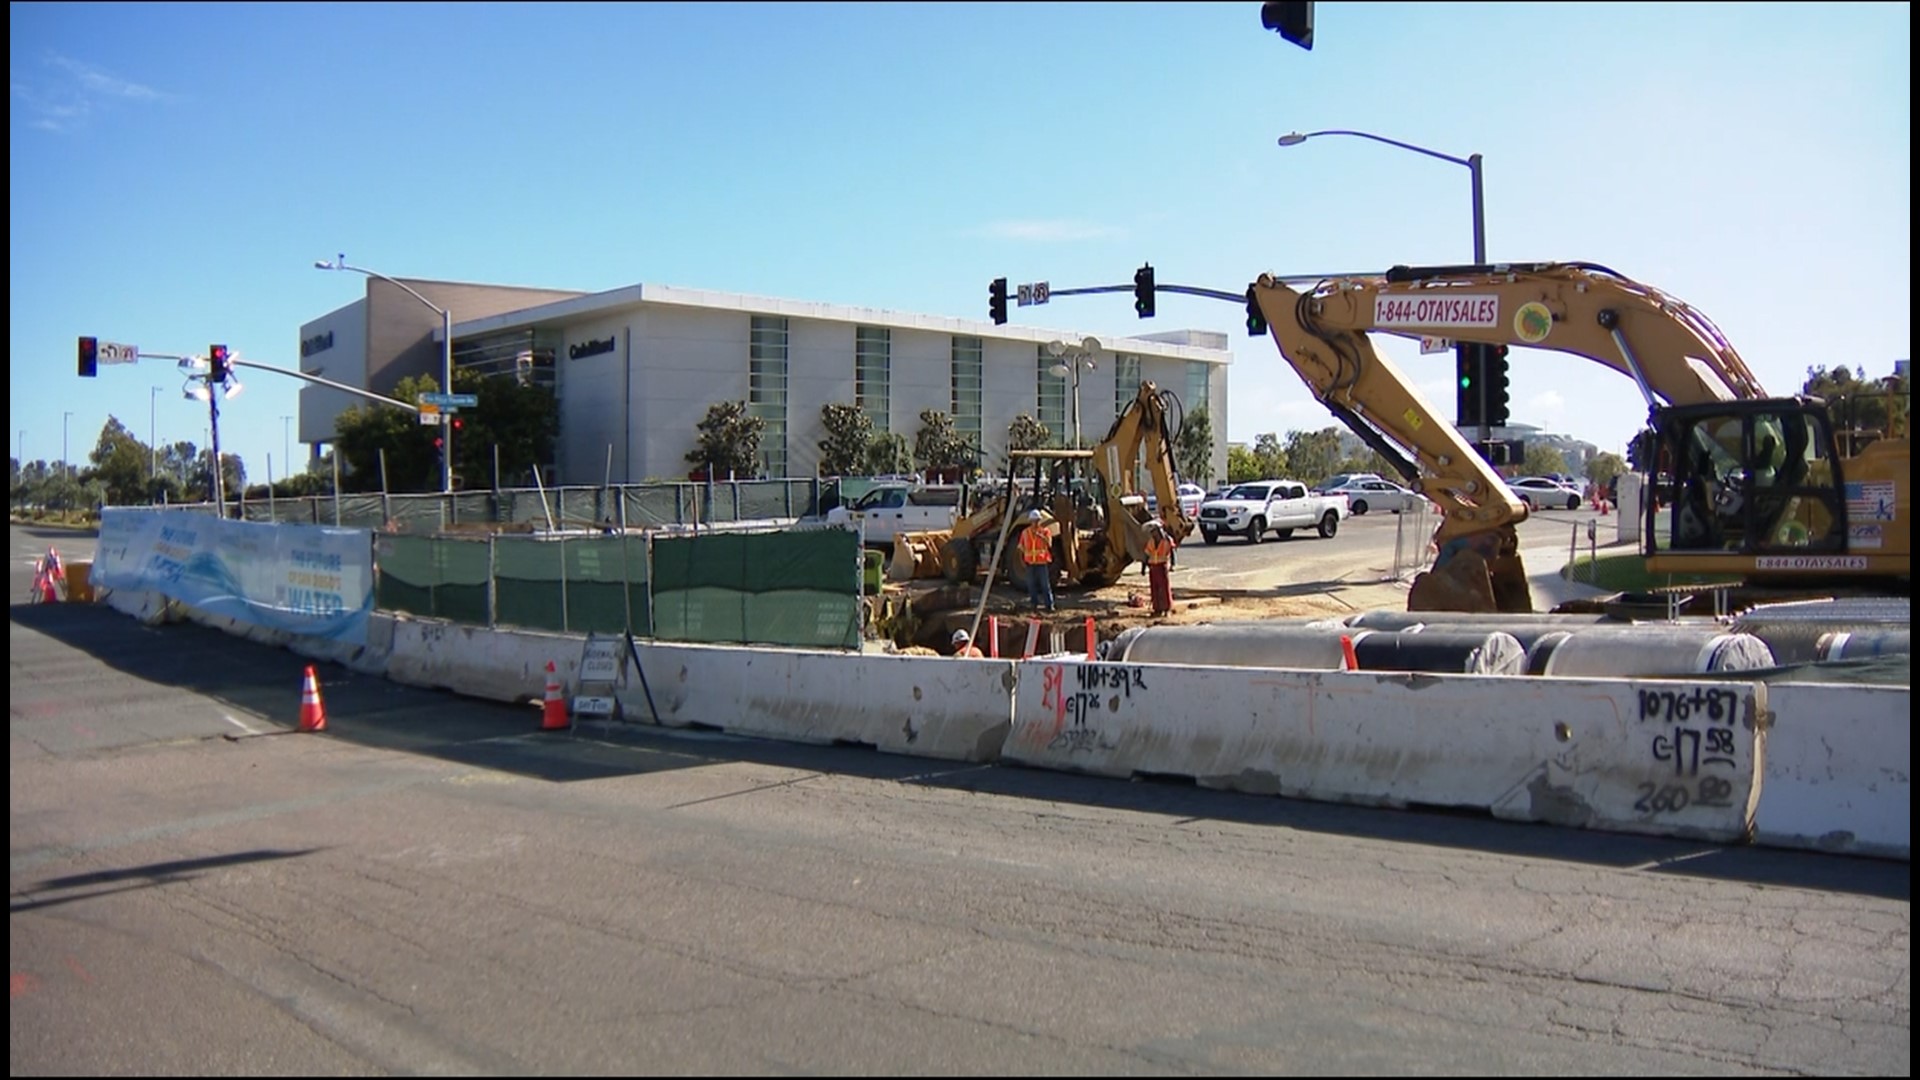 Construction at the intersection expected to last through July 2 as crews install pipeline.